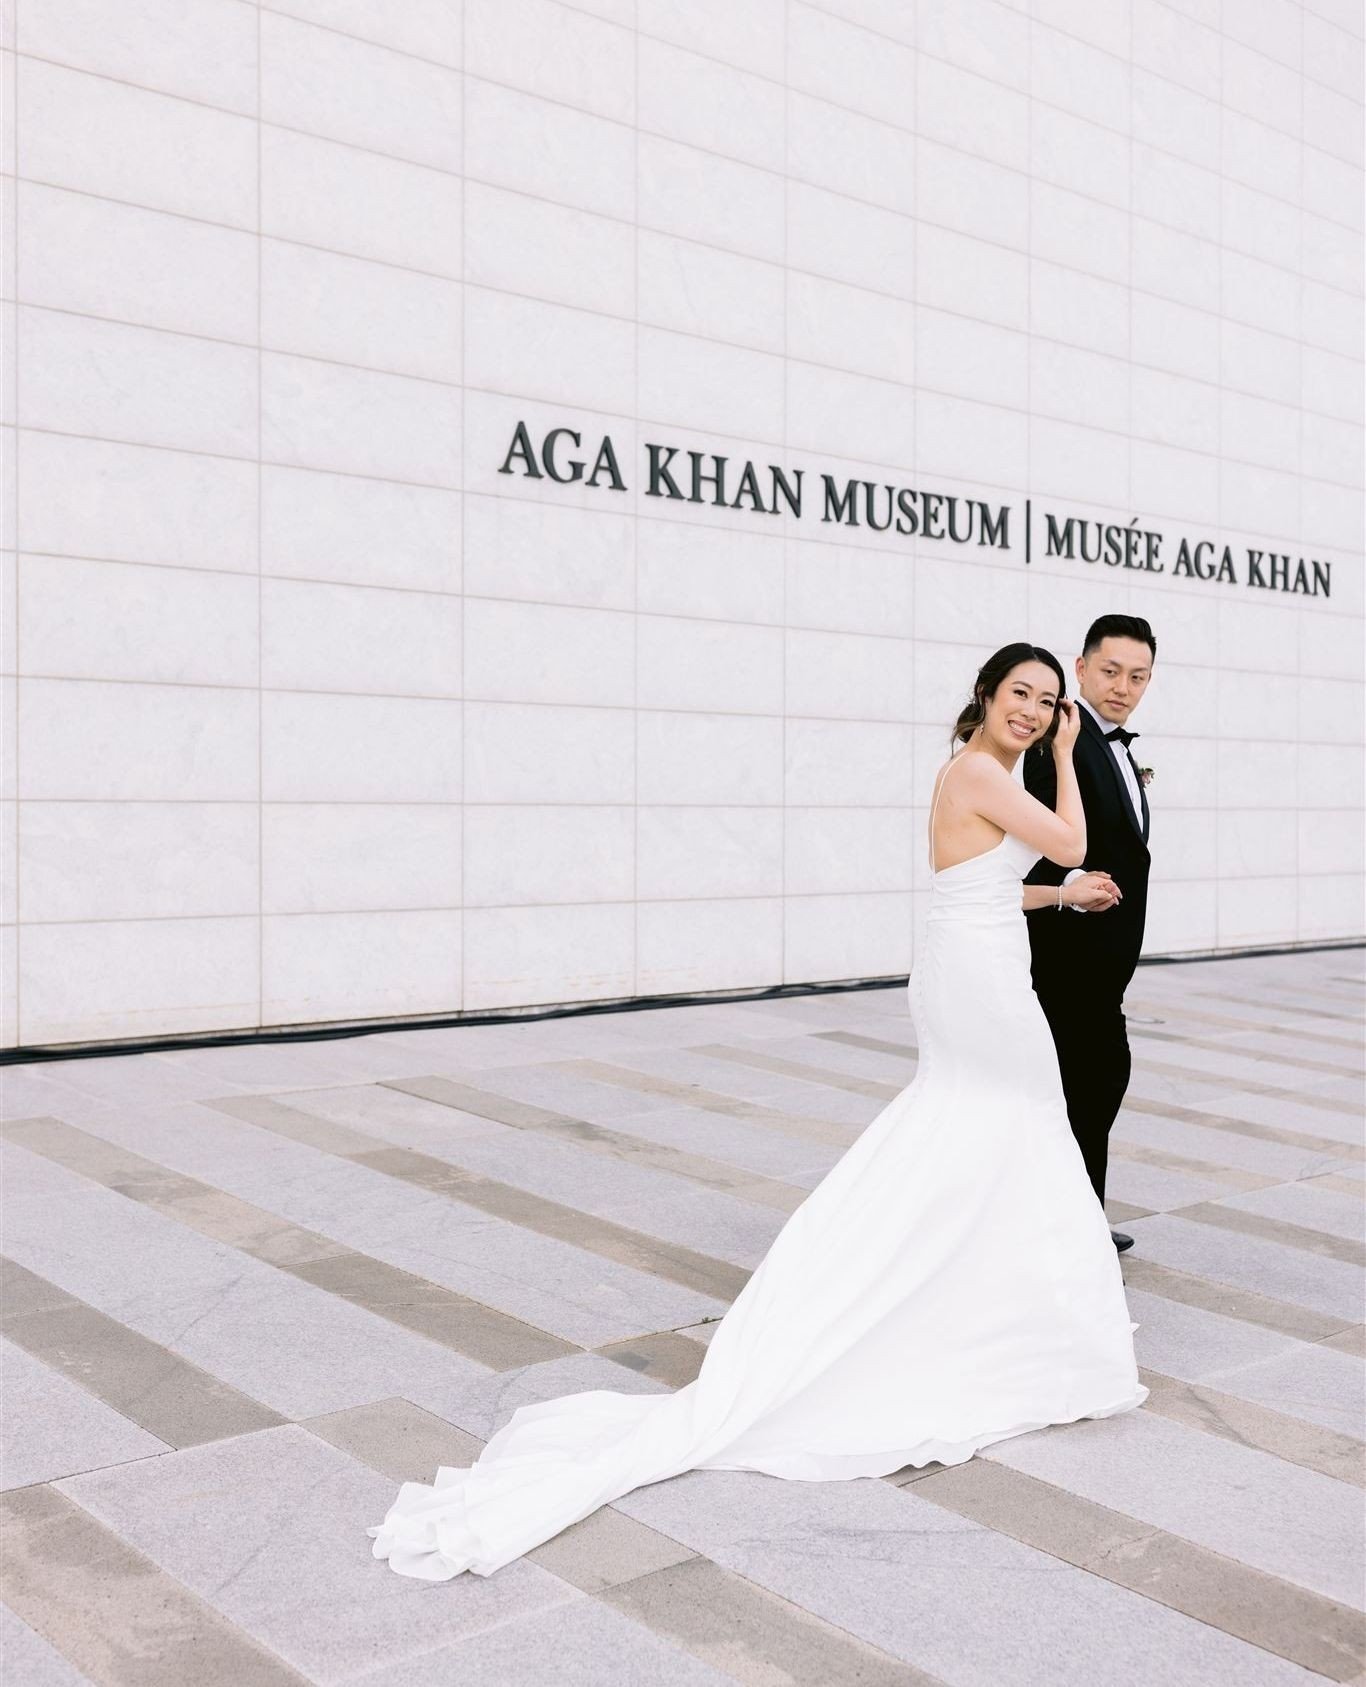 When at the @agakhanmuseum, you gotta hit up all the classic spots. Swipe through to see how they turned out! Do you recognize all the spots? 🤫⁠
⁠
Special thanks to this wonderful team ❤️⁠
Videography: @sdeweddings⁠
MUAH: @aglowbyjoan⁠
Florist: @par